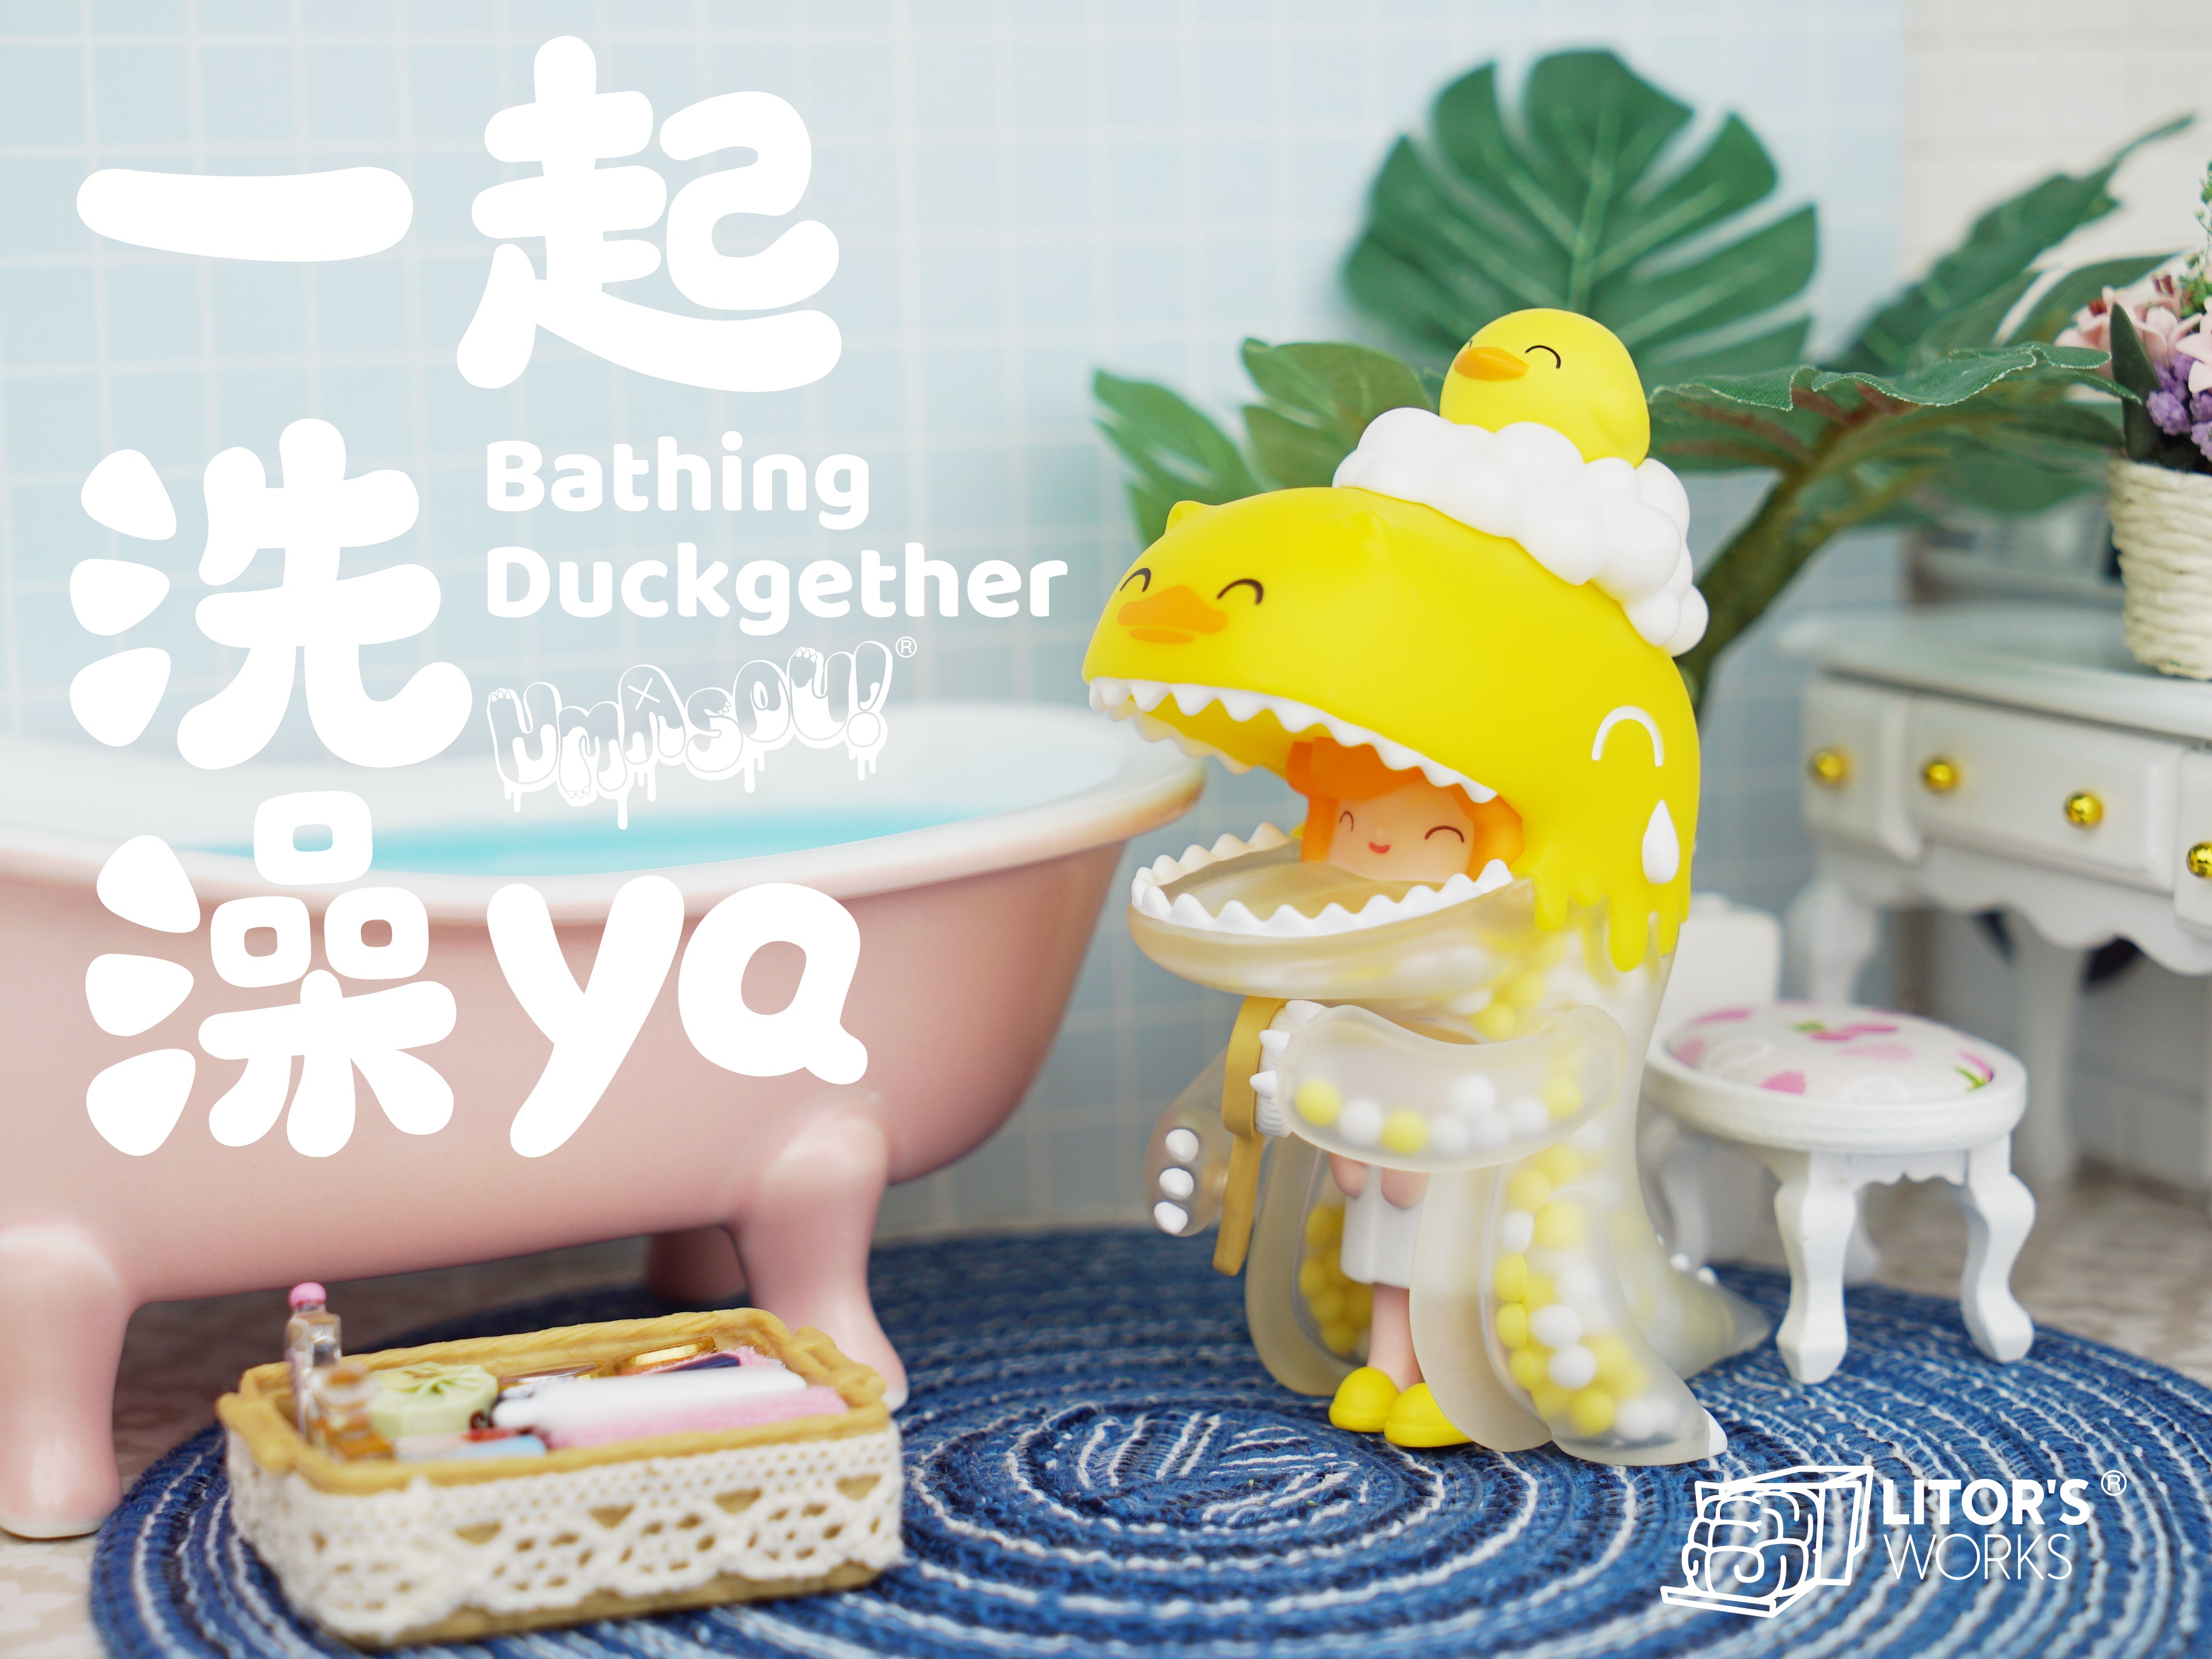 Umasou! Blind Box Working Duckgether by Litor's Works